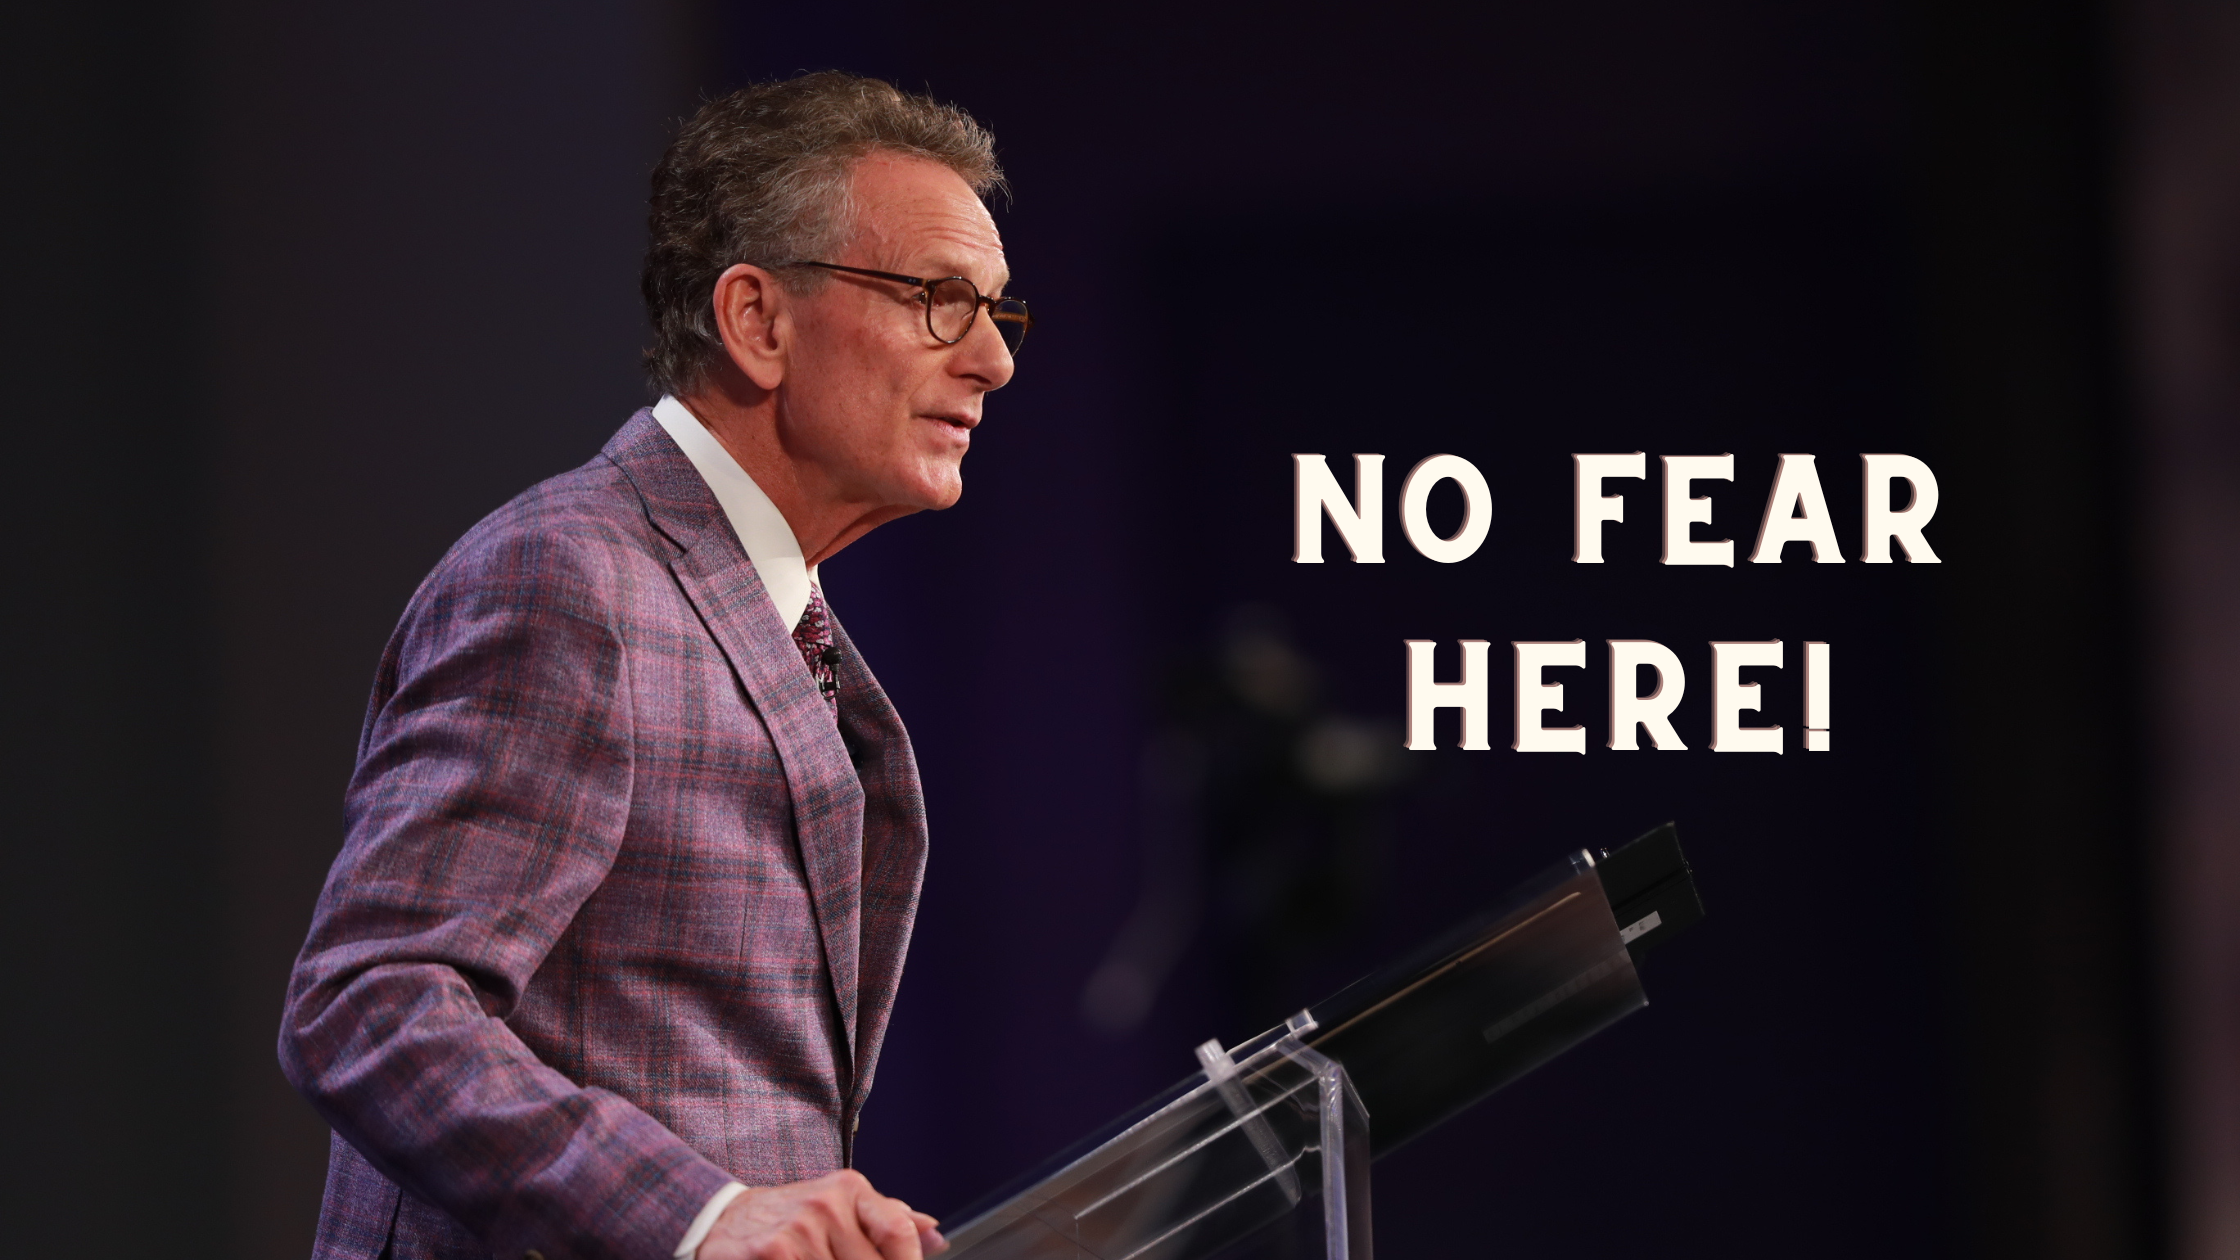 No Fear Here! Written by Pastor George